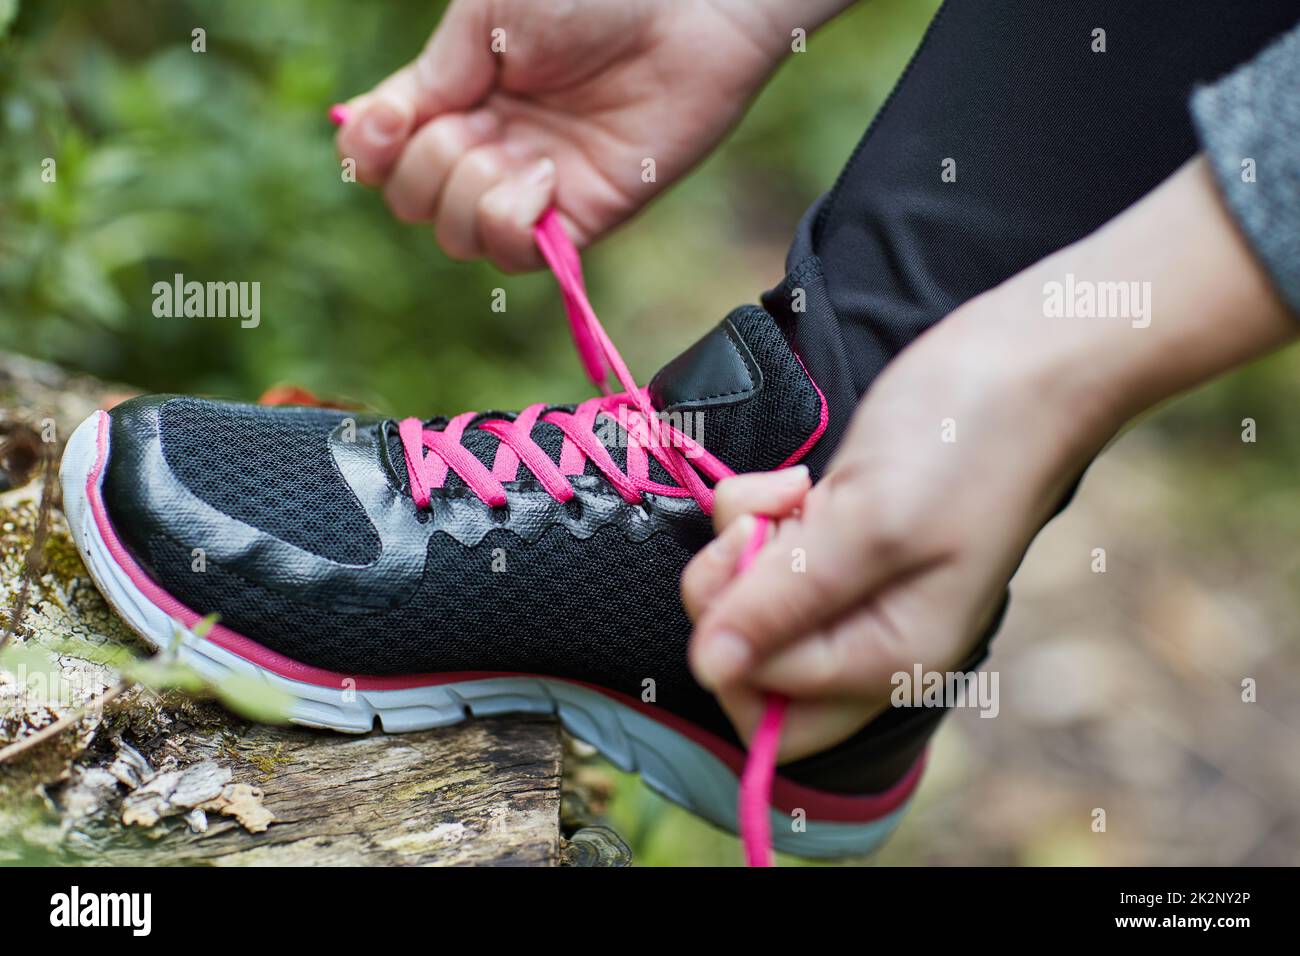 Laced up and ready to go. Shot of an unidentifiable young woman tying her shoelaces while hiking in the forest. Stock Photo